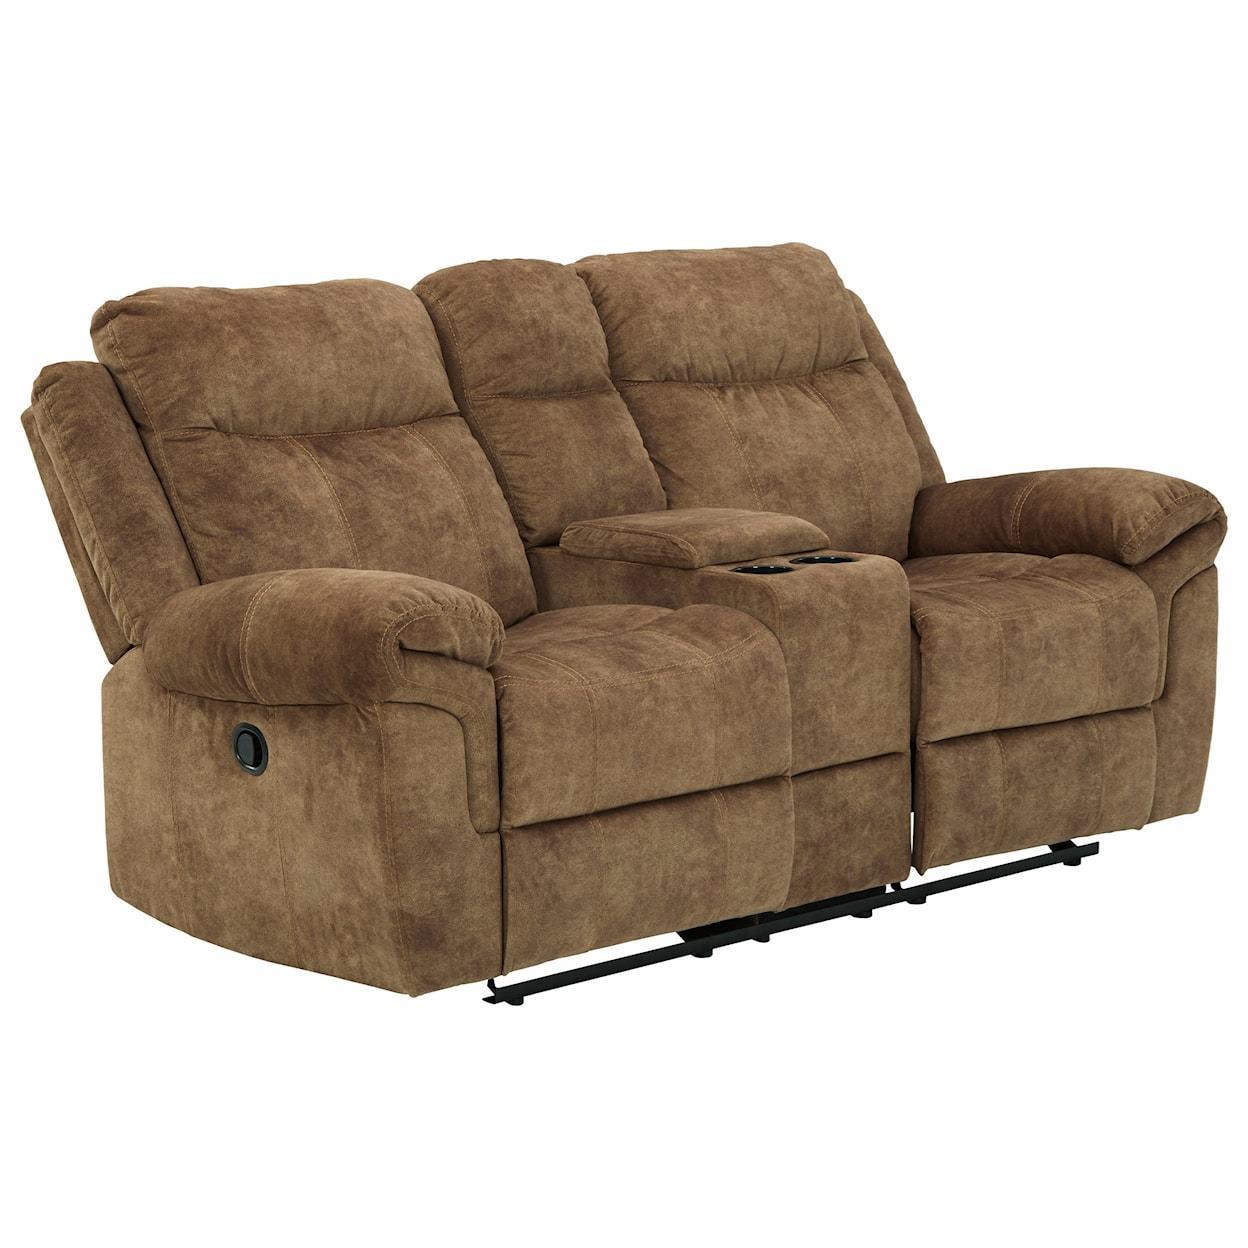 Signature Design Huddle-Up Double Reclining Loveseat w/ Console